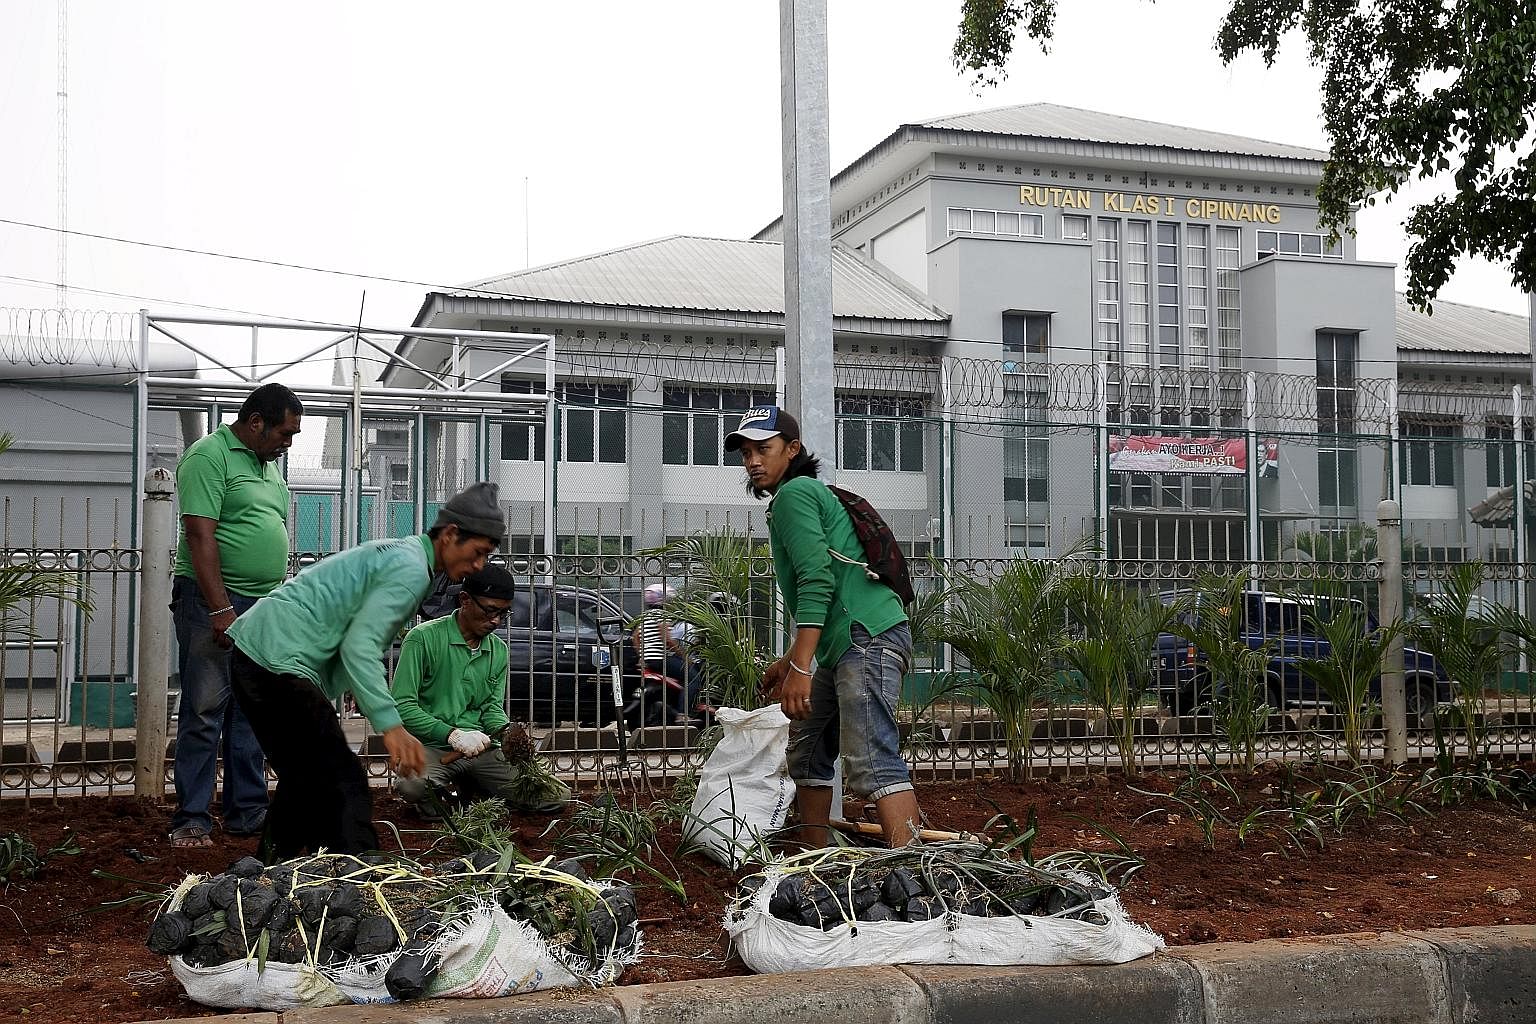 Labourers doing planting work in front of Cipinang prison, where one of the four men who carried out the Jan 14 attacks in Jakarta was influenced by fellow convict and firebrand cleric Aman Abdurrahman while an inmate. Some terrorist recidivists whom